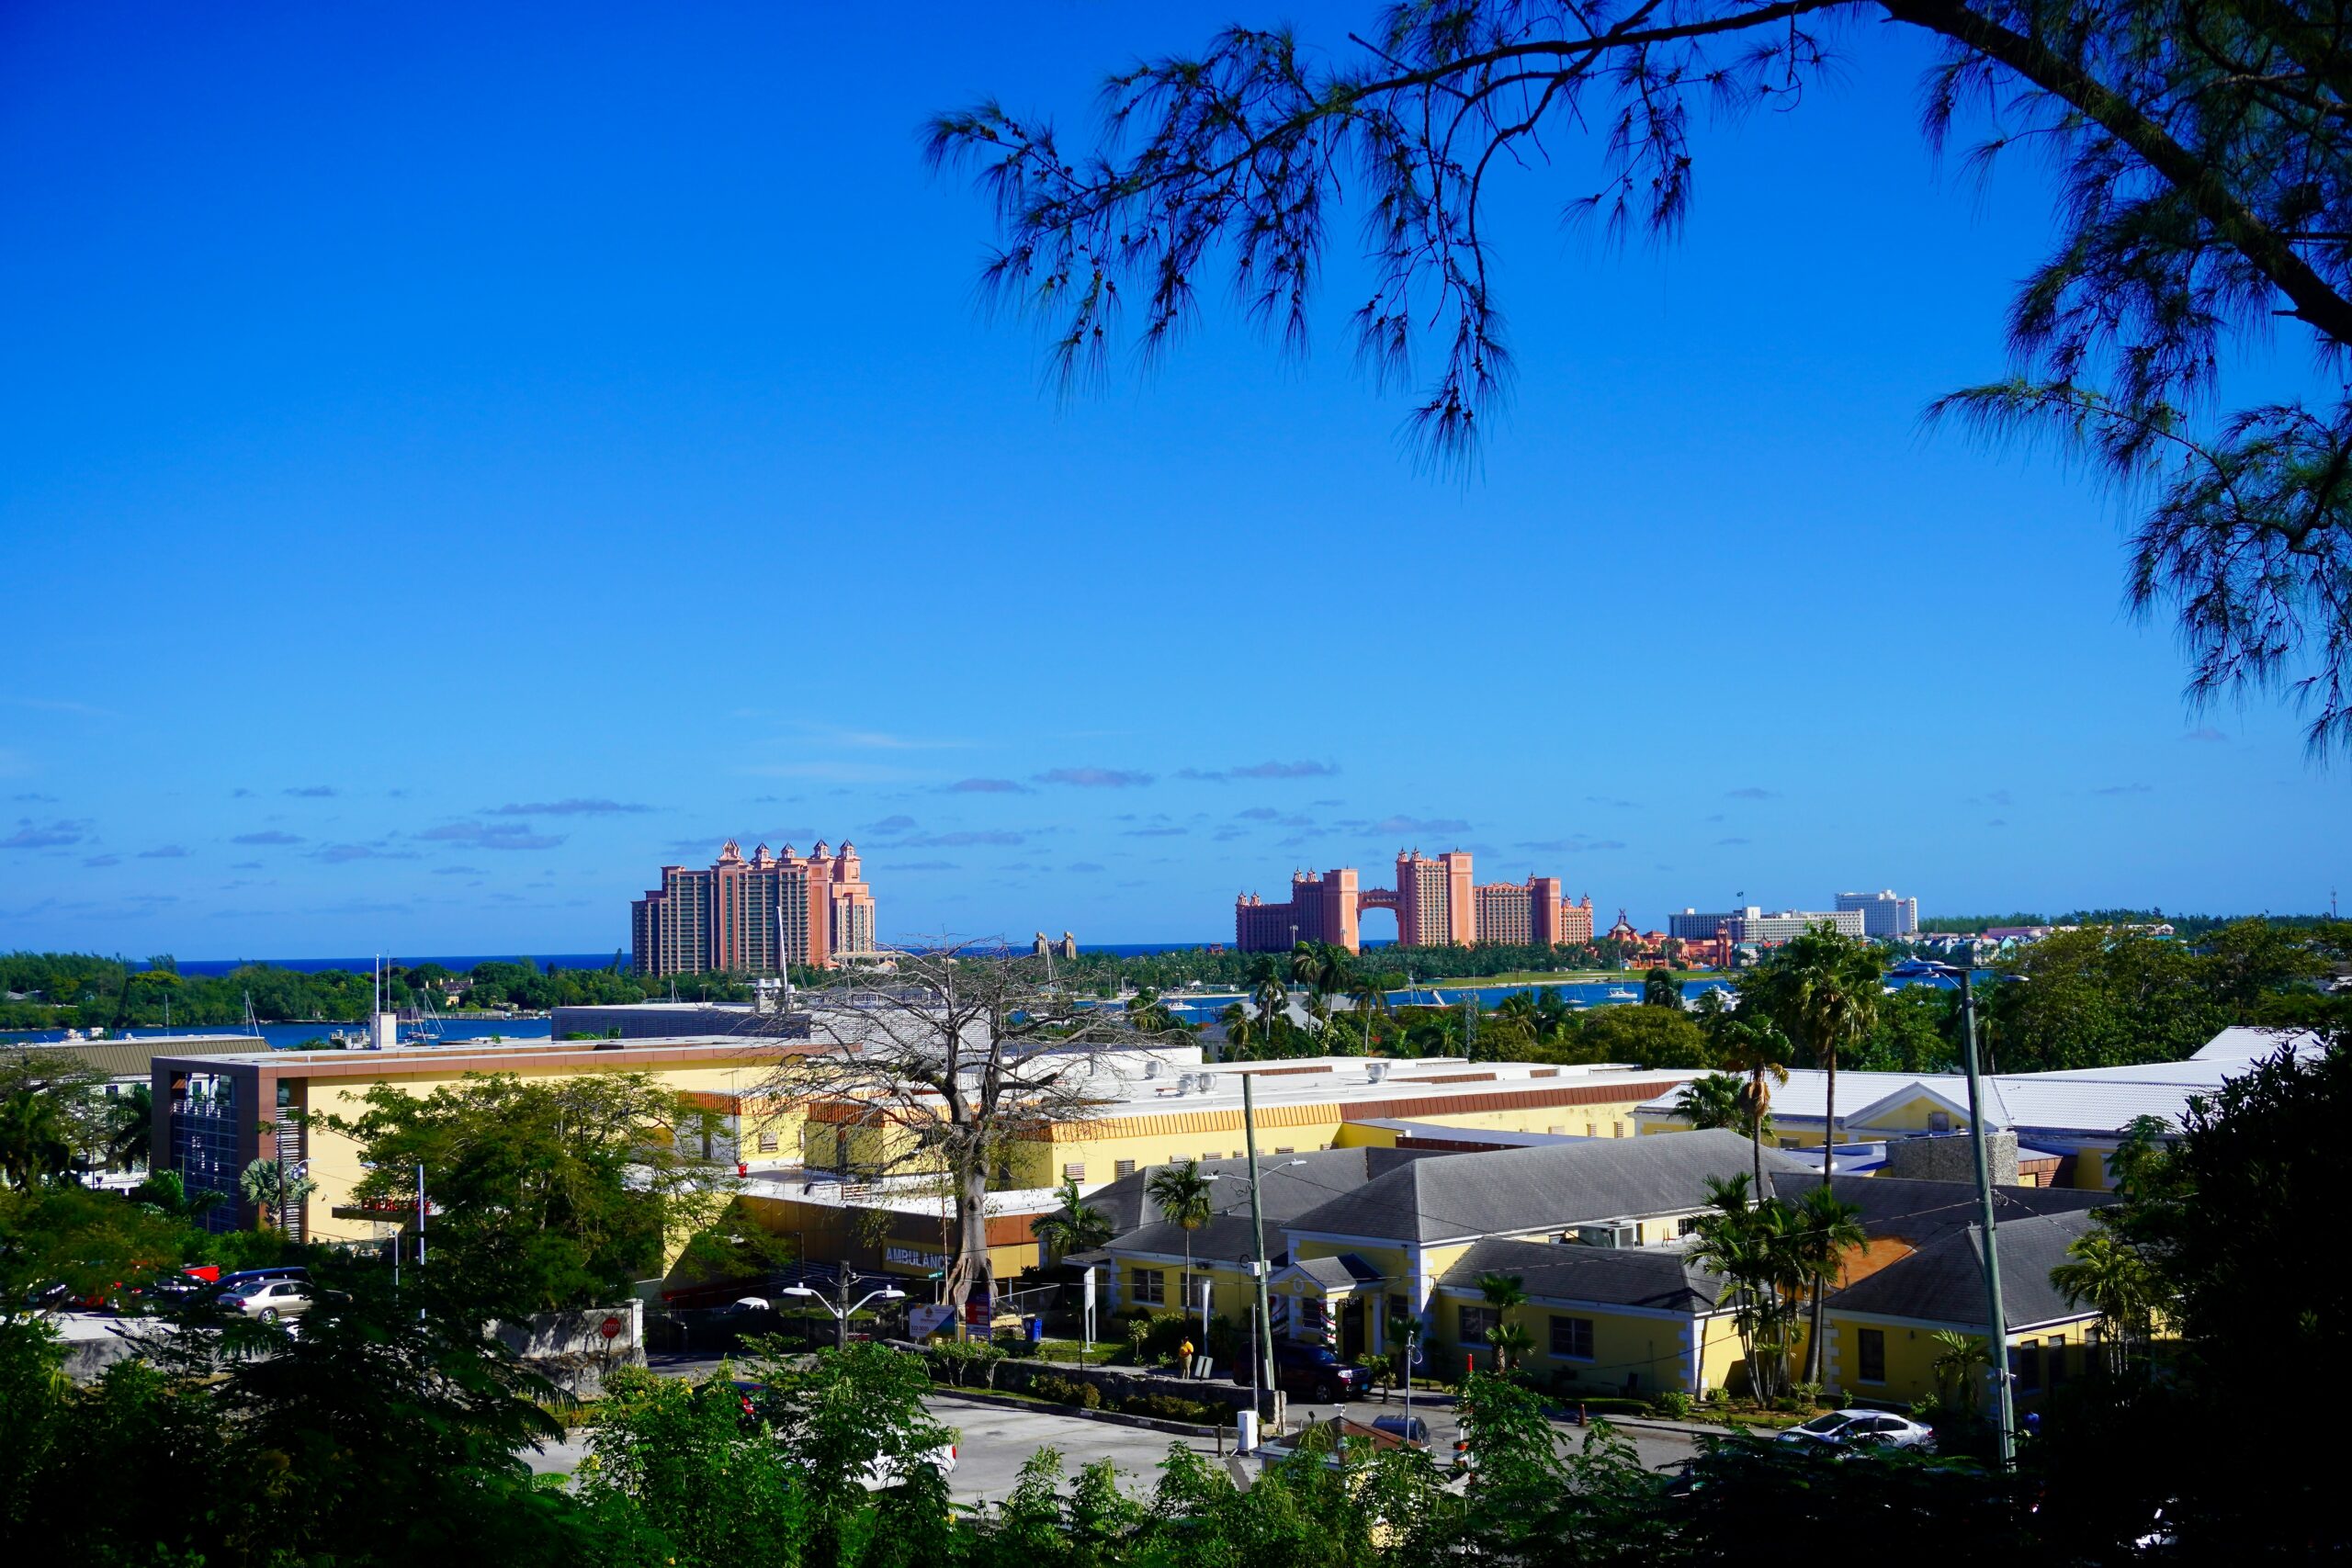 The Nassau Cruise Port is a popular place to stop during a relaxing trip. 
Pictured: a distant view of the resorts in Nassau Bahamas 